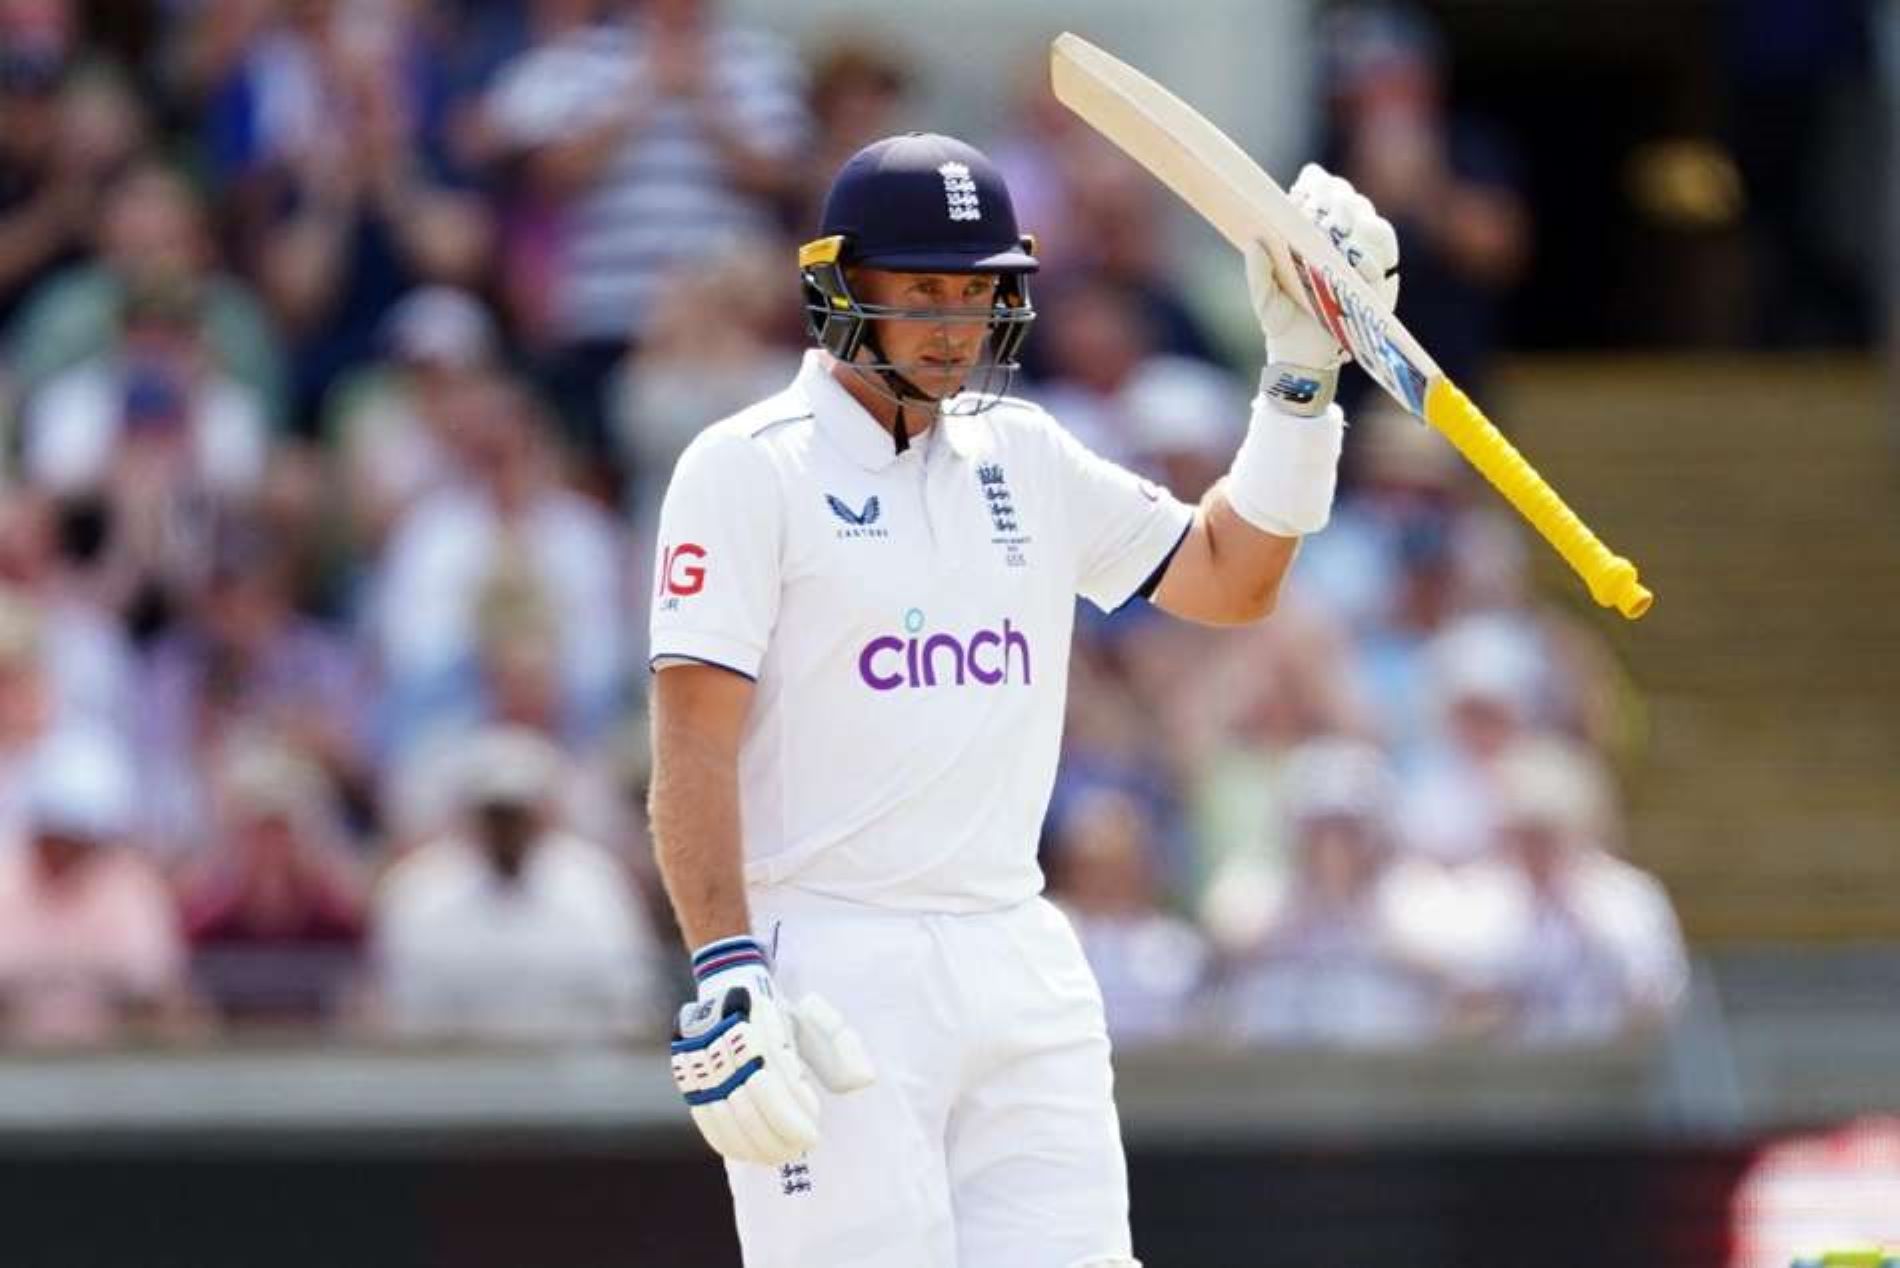 Joe Root will look to produce another masterclass to lead England to victory.